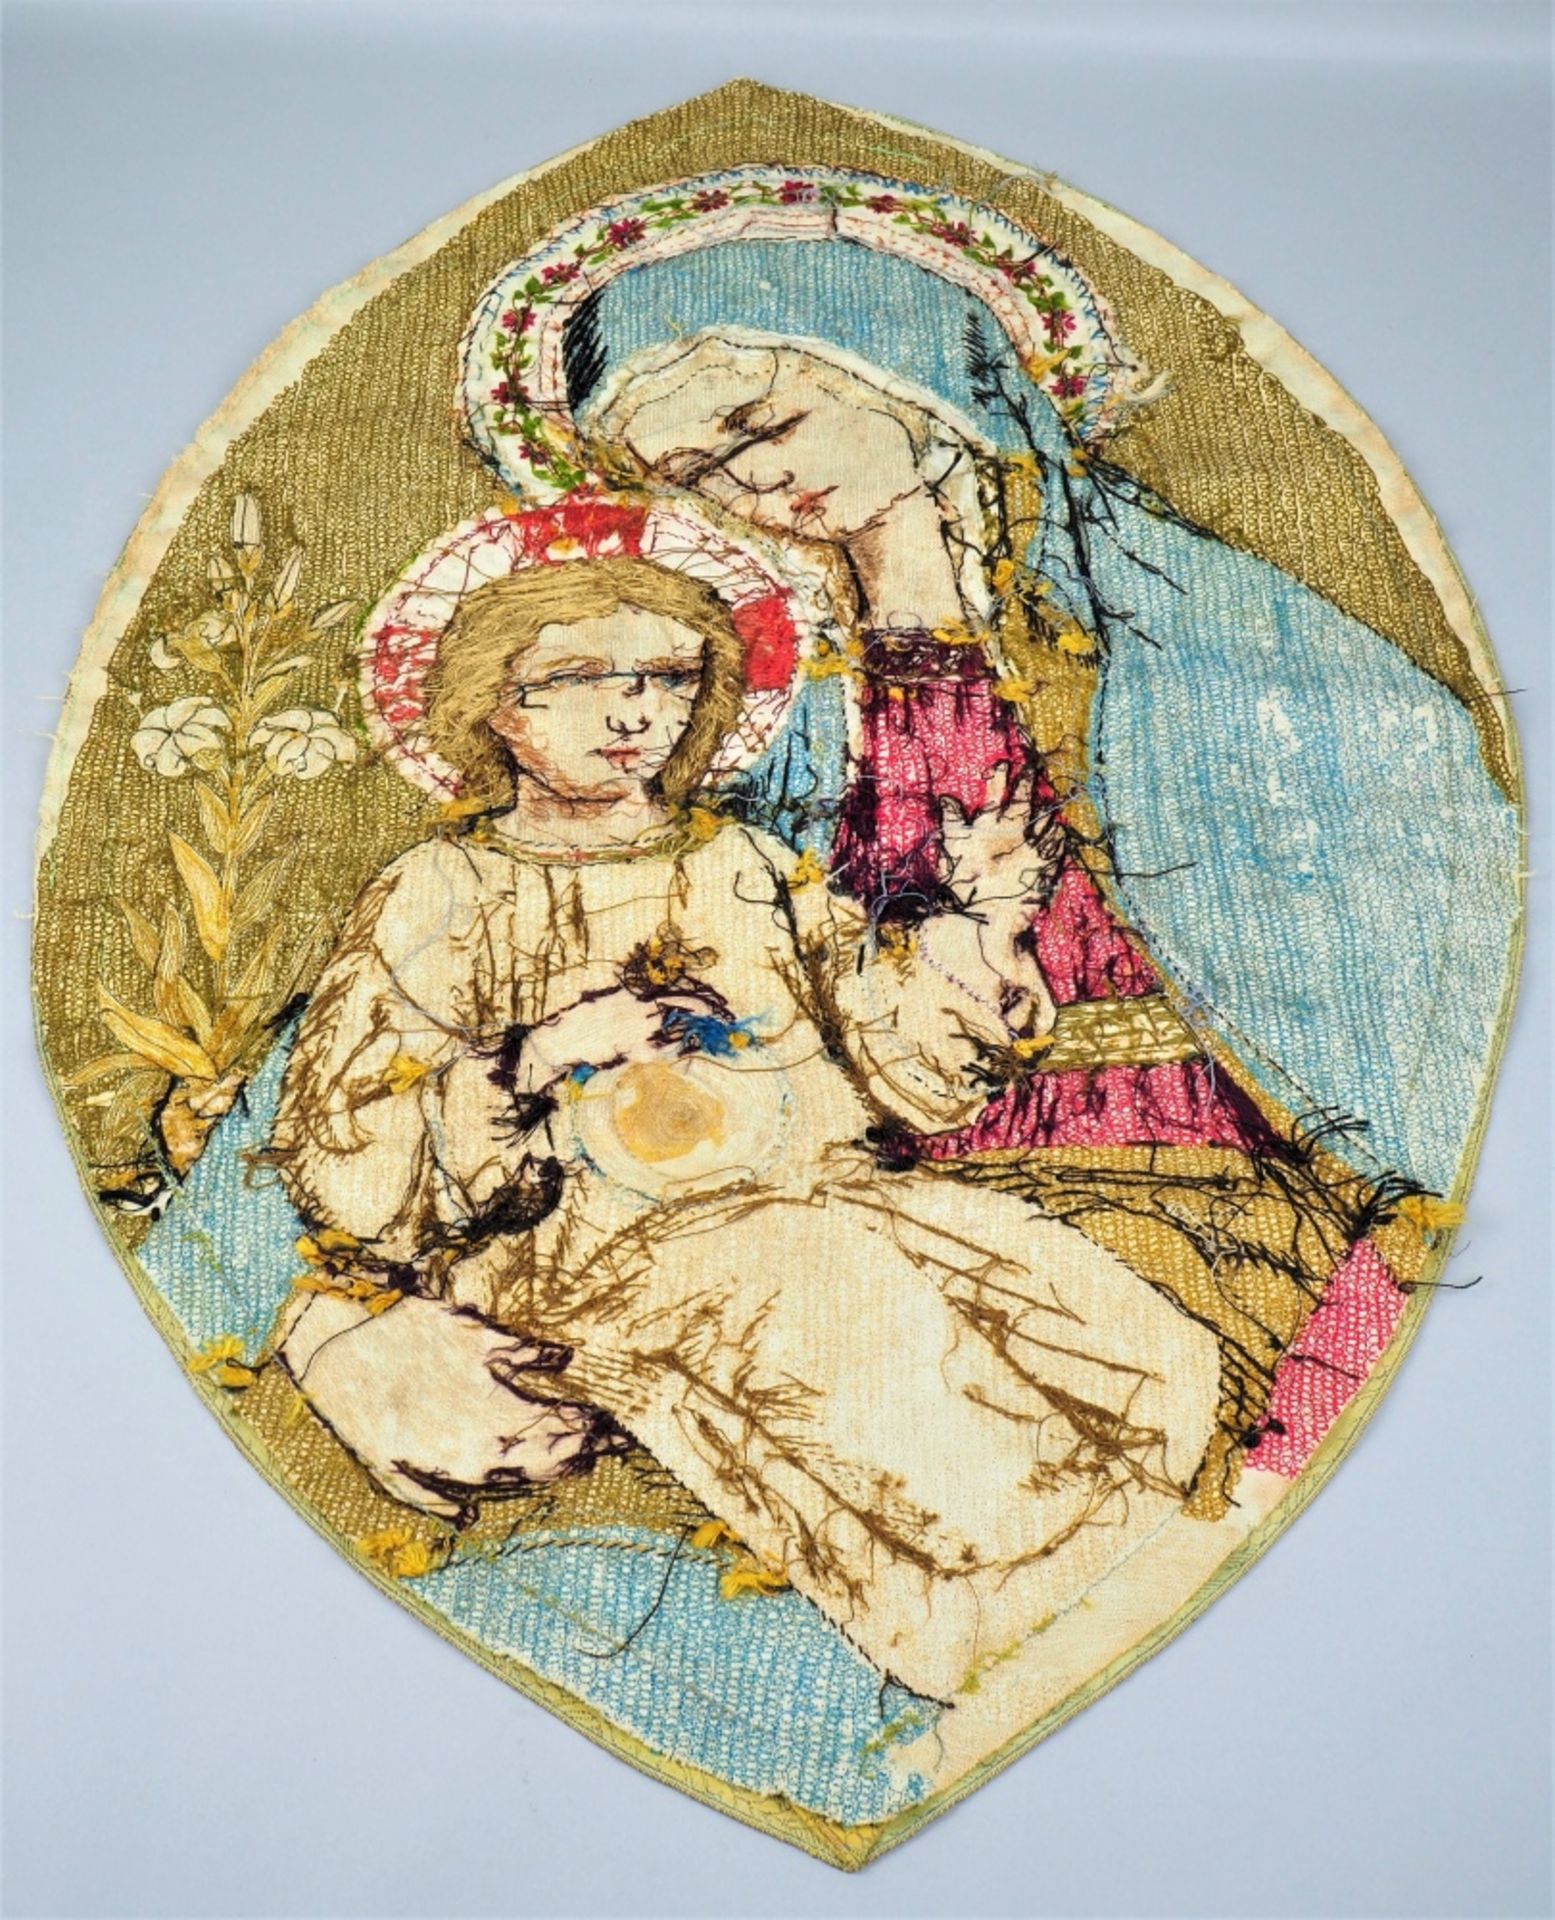 Embroidery Madonna with child, around 1900 - Image 5 of 5